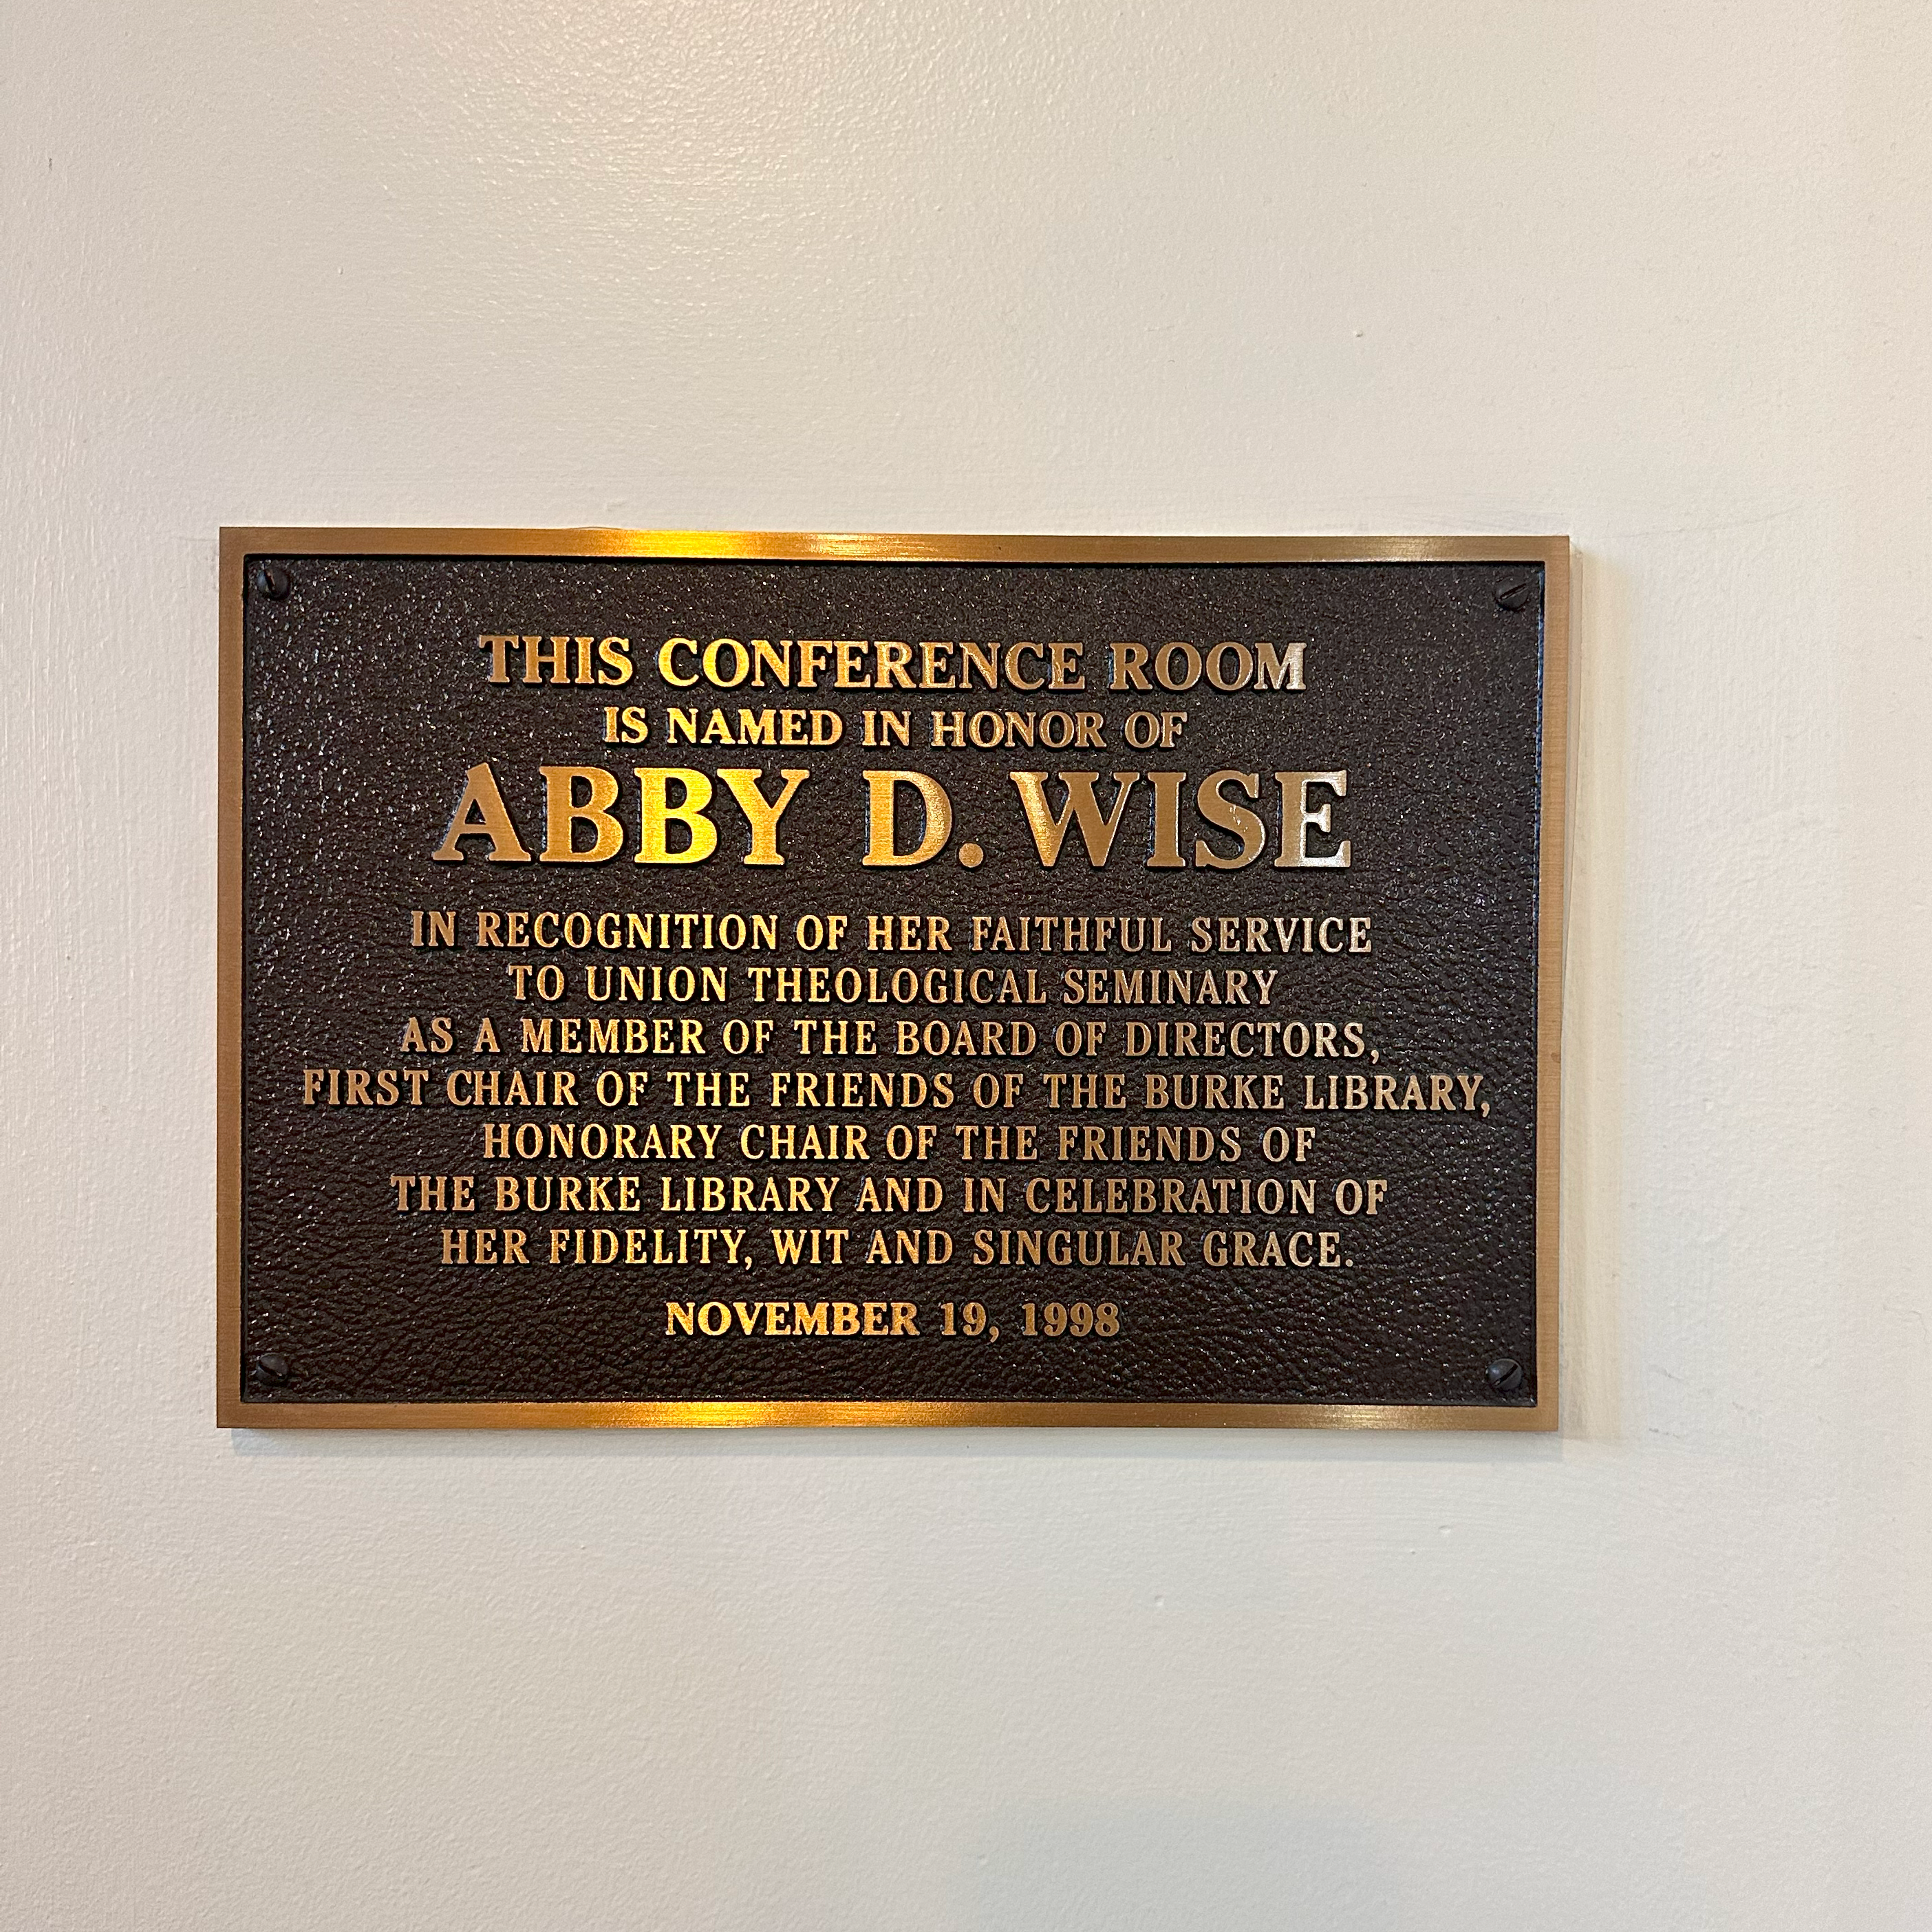 abby d wise conference room plaque